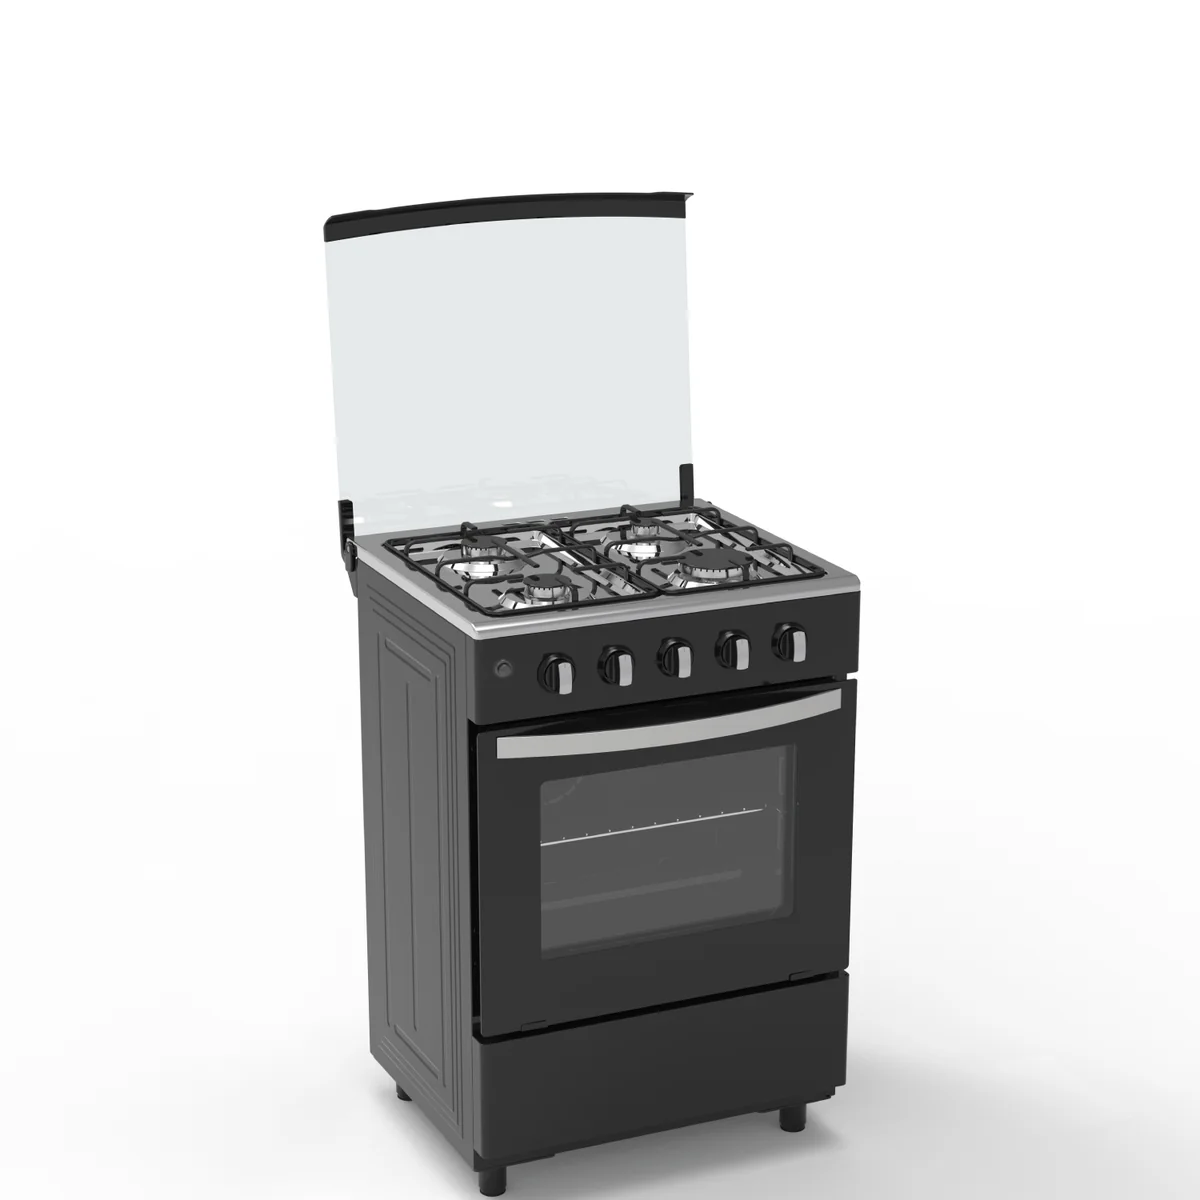 AEON STANDING GAS COOKER 60 X 60 CM 4+0 BURNER WITH STRONG PAN SUPPORT